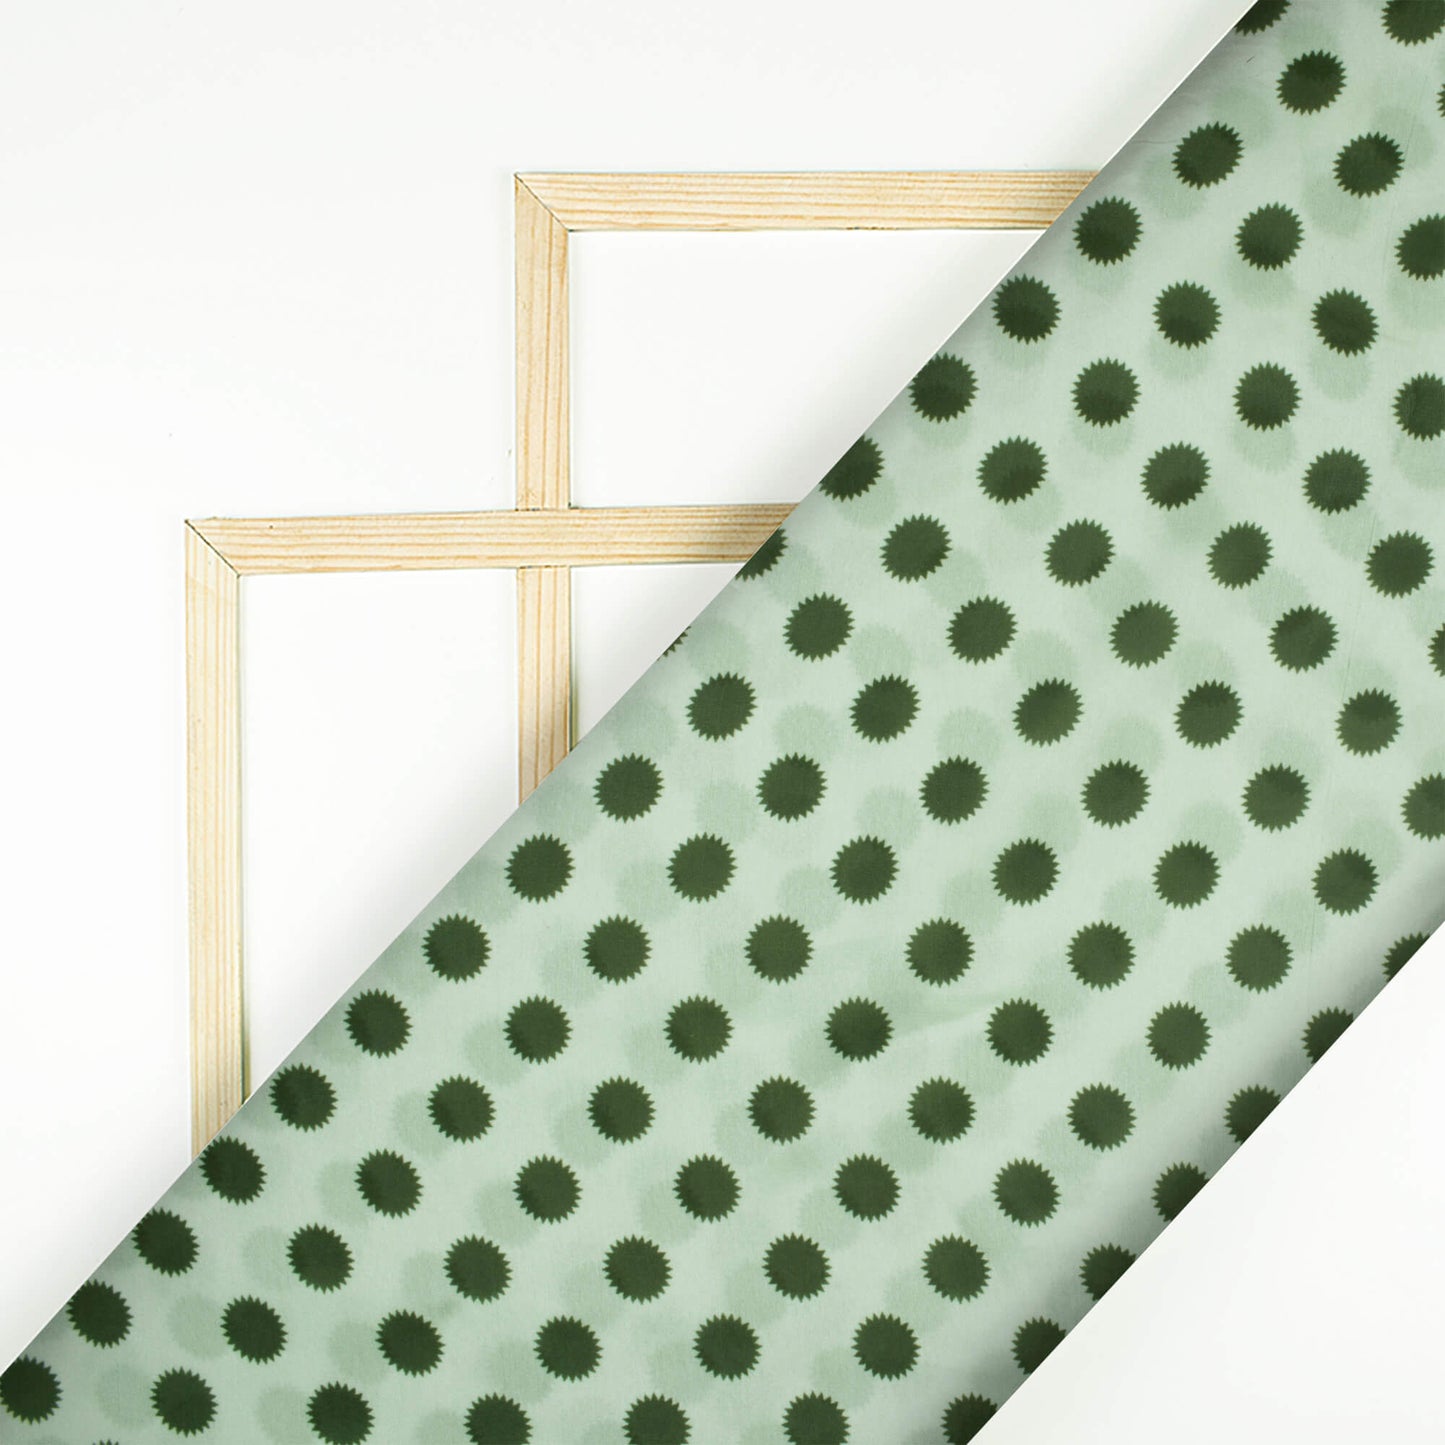 Off White And Green Polka Dots Pattern Digital Print Georgette Satin Fabric